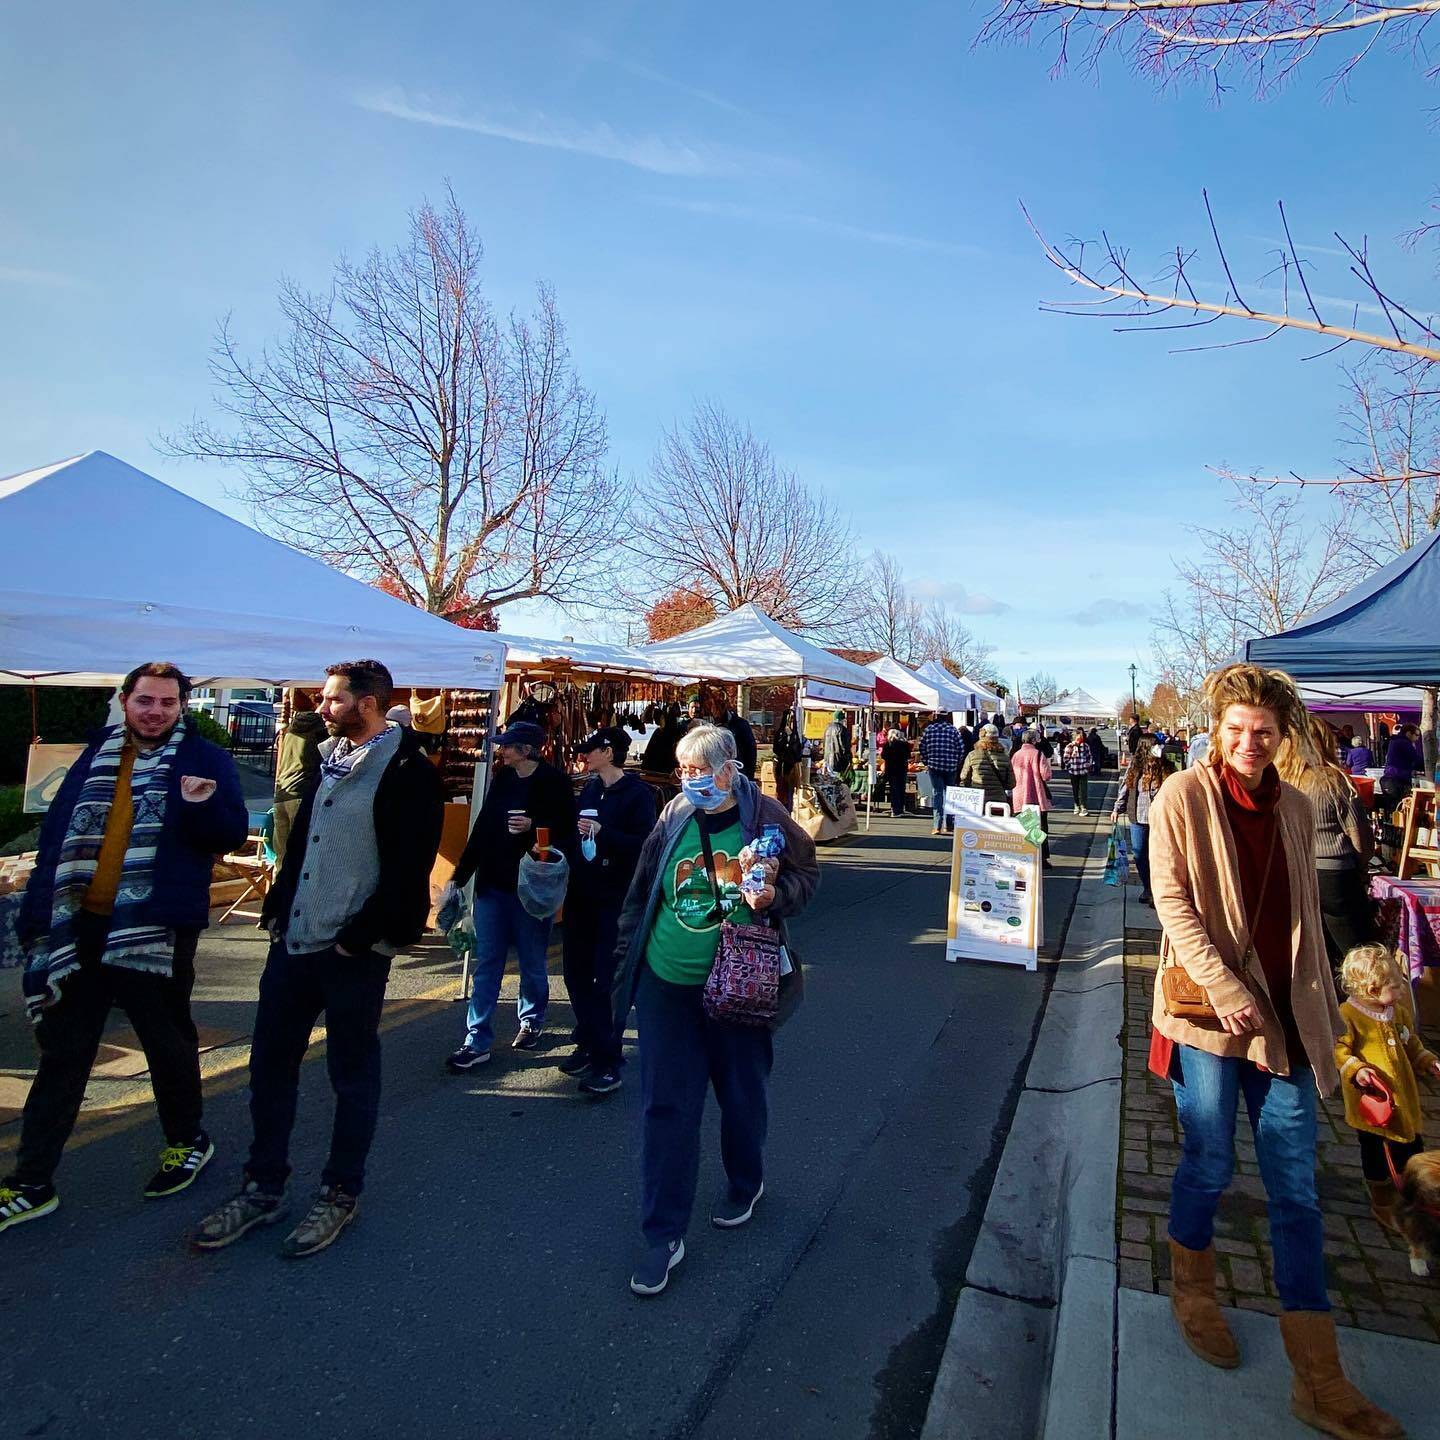 Photo courtesy of Sequim Farmers & Artisans Market / The Sequim Farmers & Artisans Market hosts its November Winter Market festivities from 10 a.m.-2 p.m. on Saturday, Nov. 18, at the Sequim Civic Center.